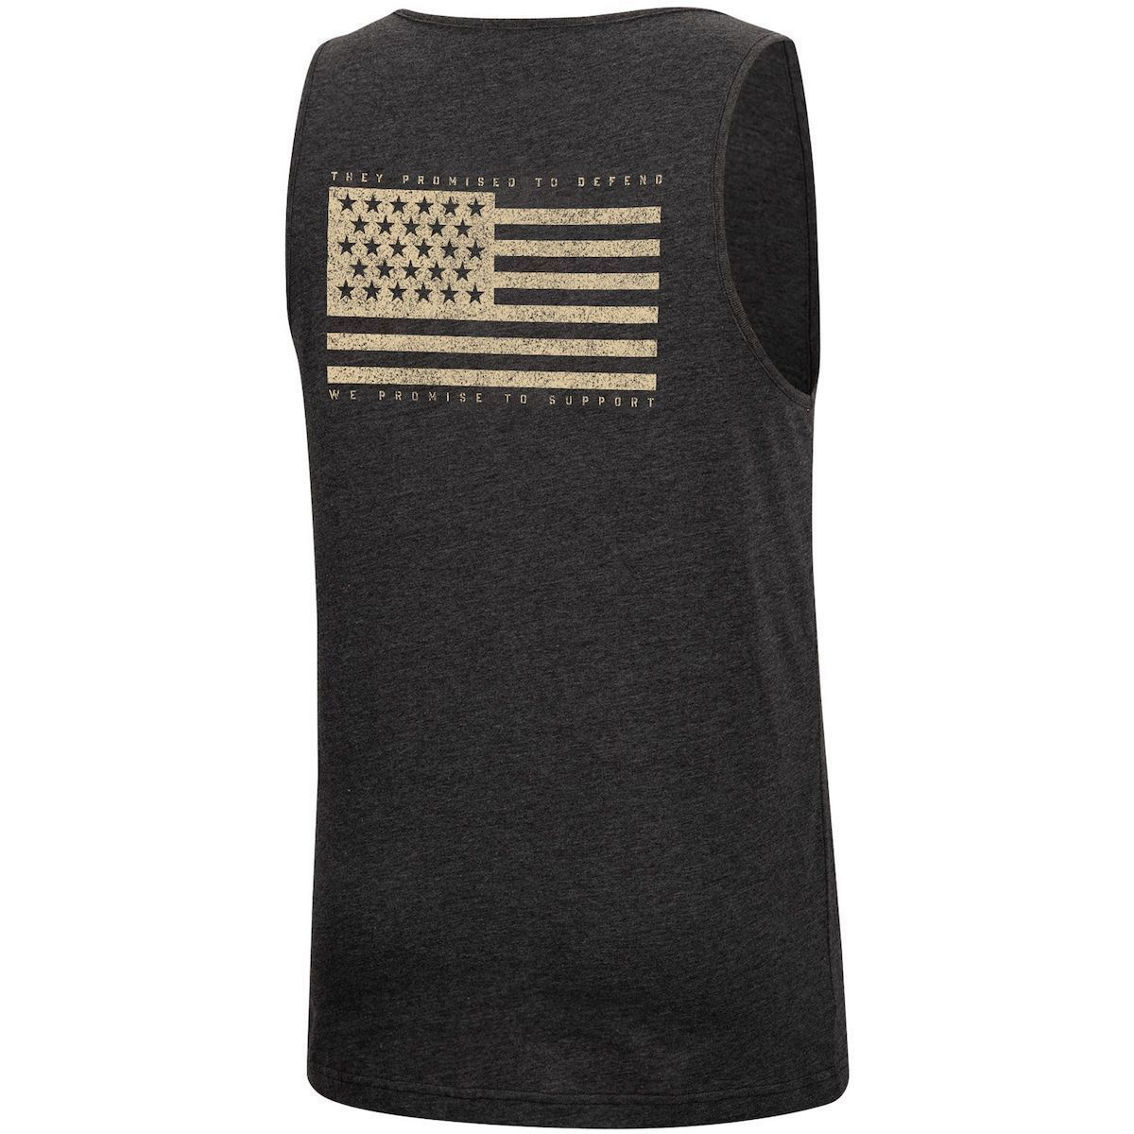 Colosseum Men's Heathered Black Air Force Falcons Military Appreciation OHT Transport Tank Top - Image 4 of 4